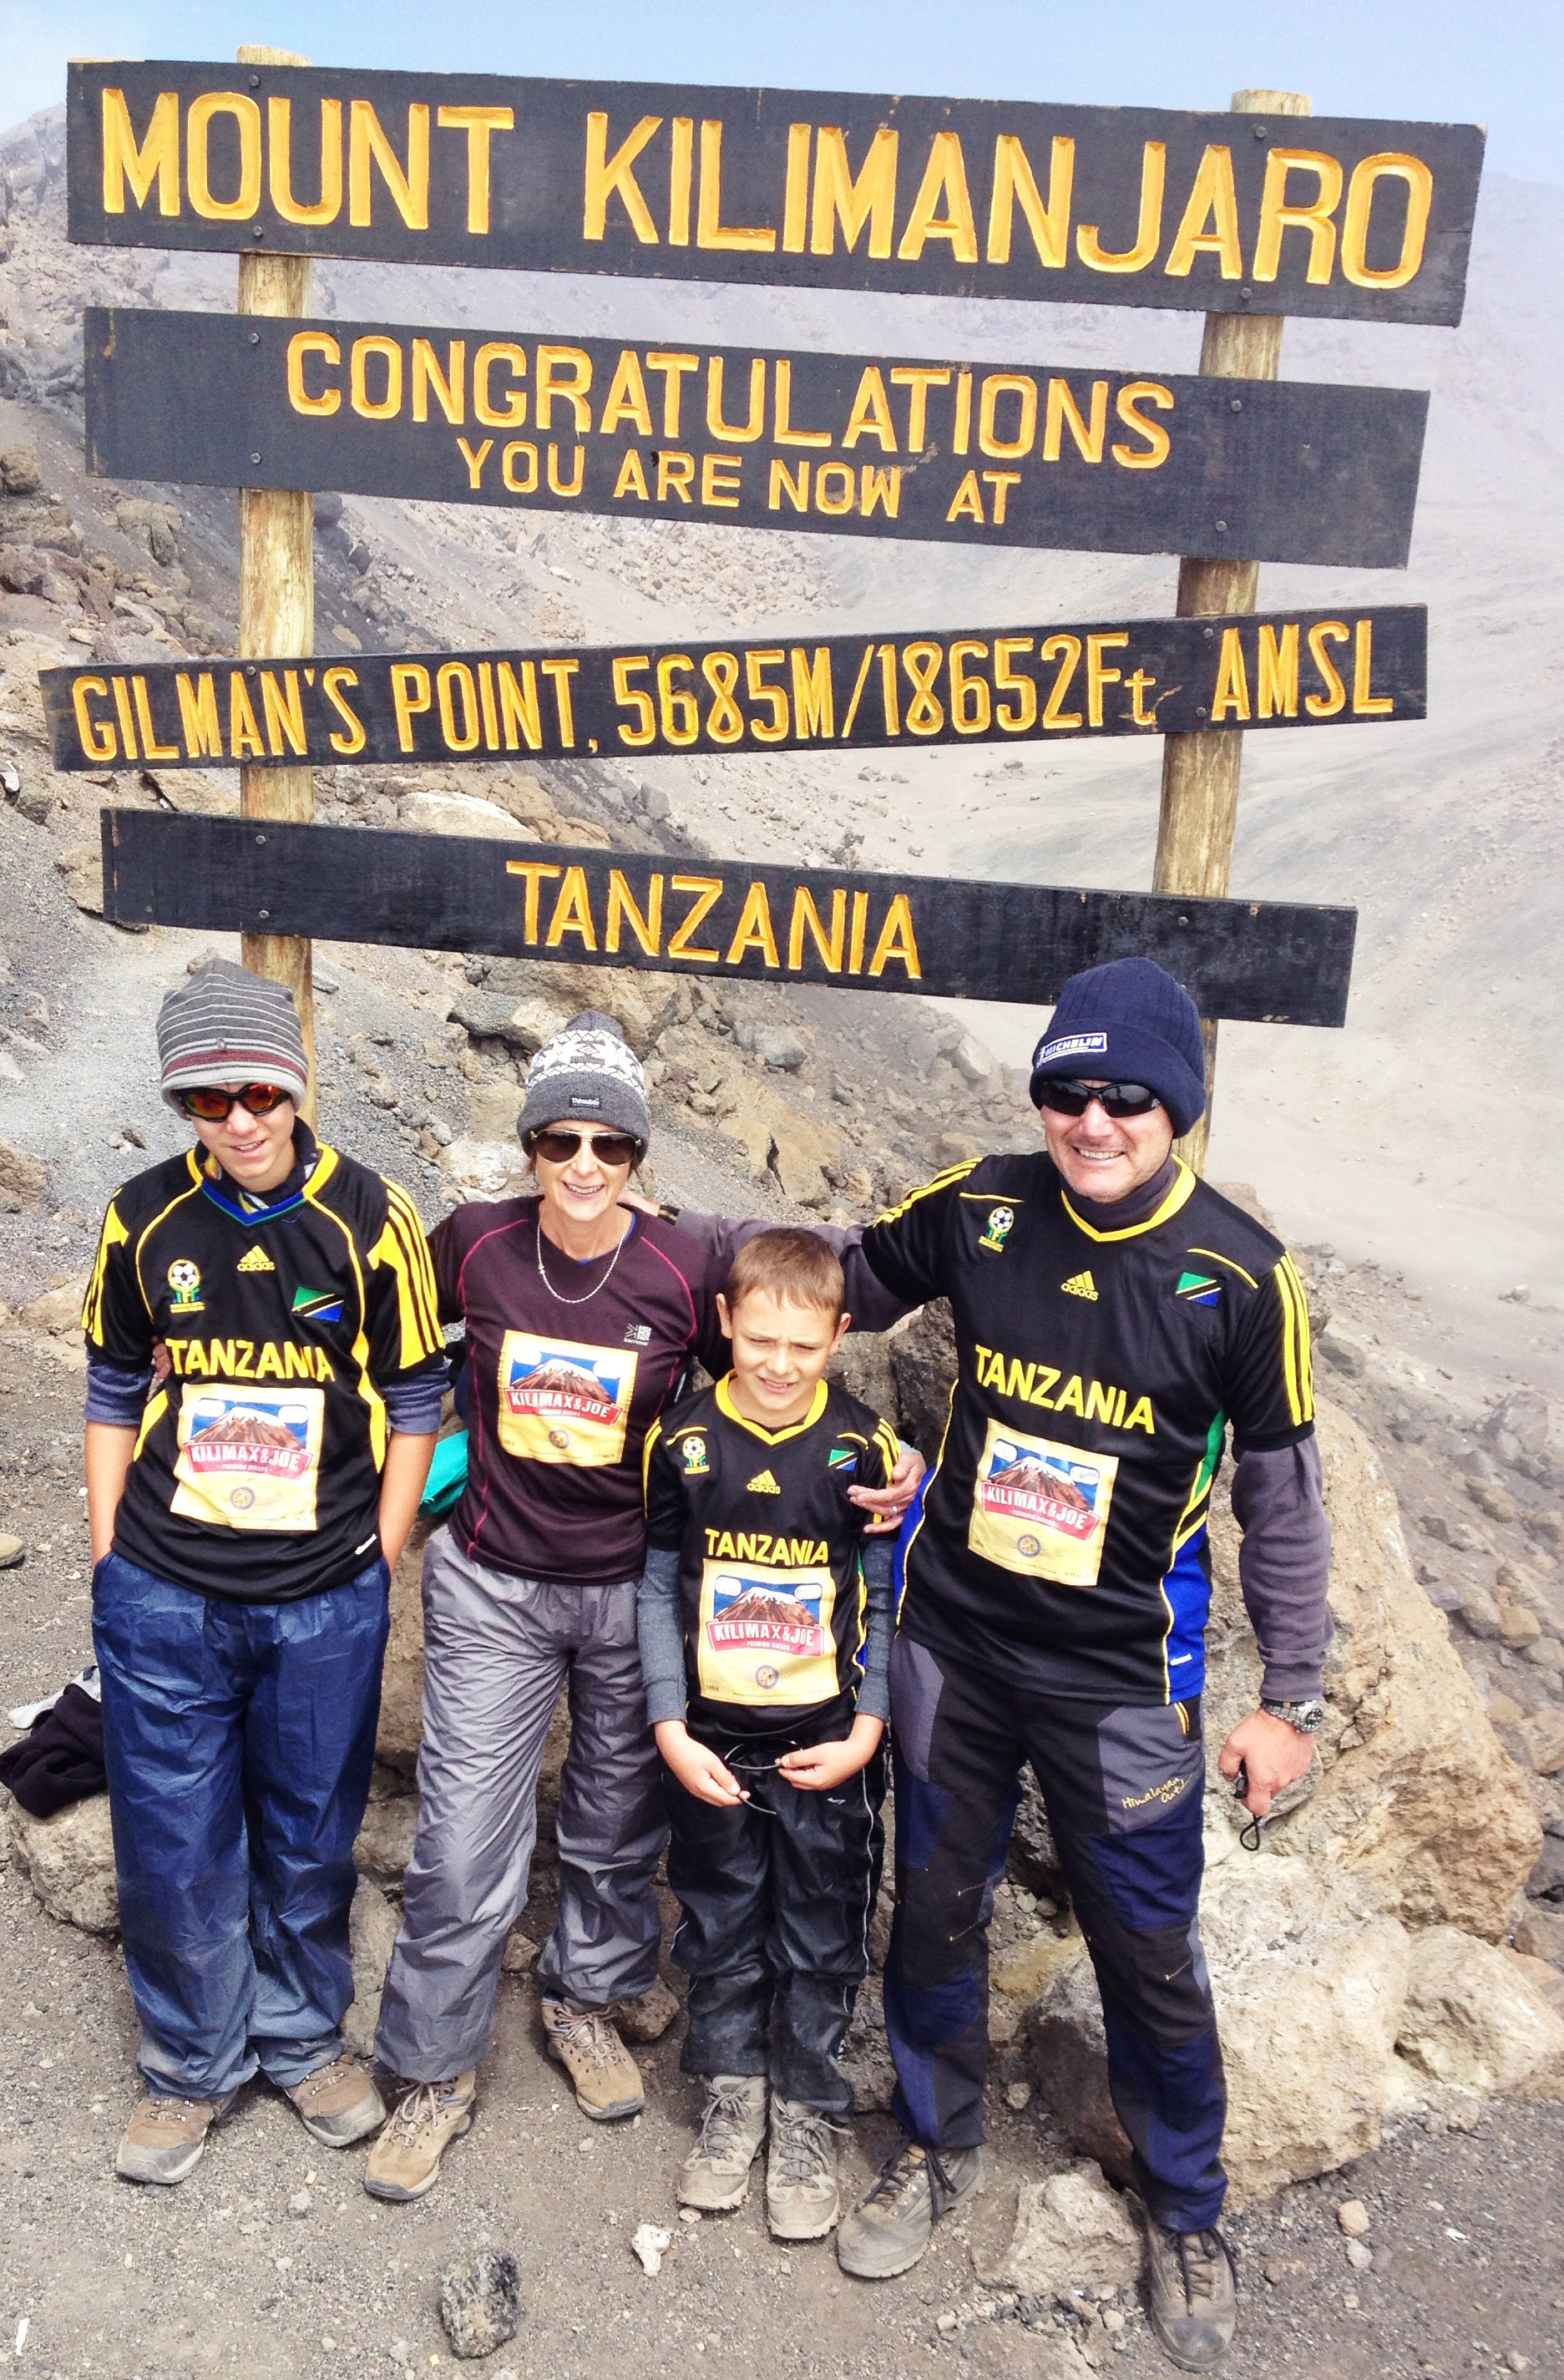 Michelin manager scales Mount Kilimanjaro for charity